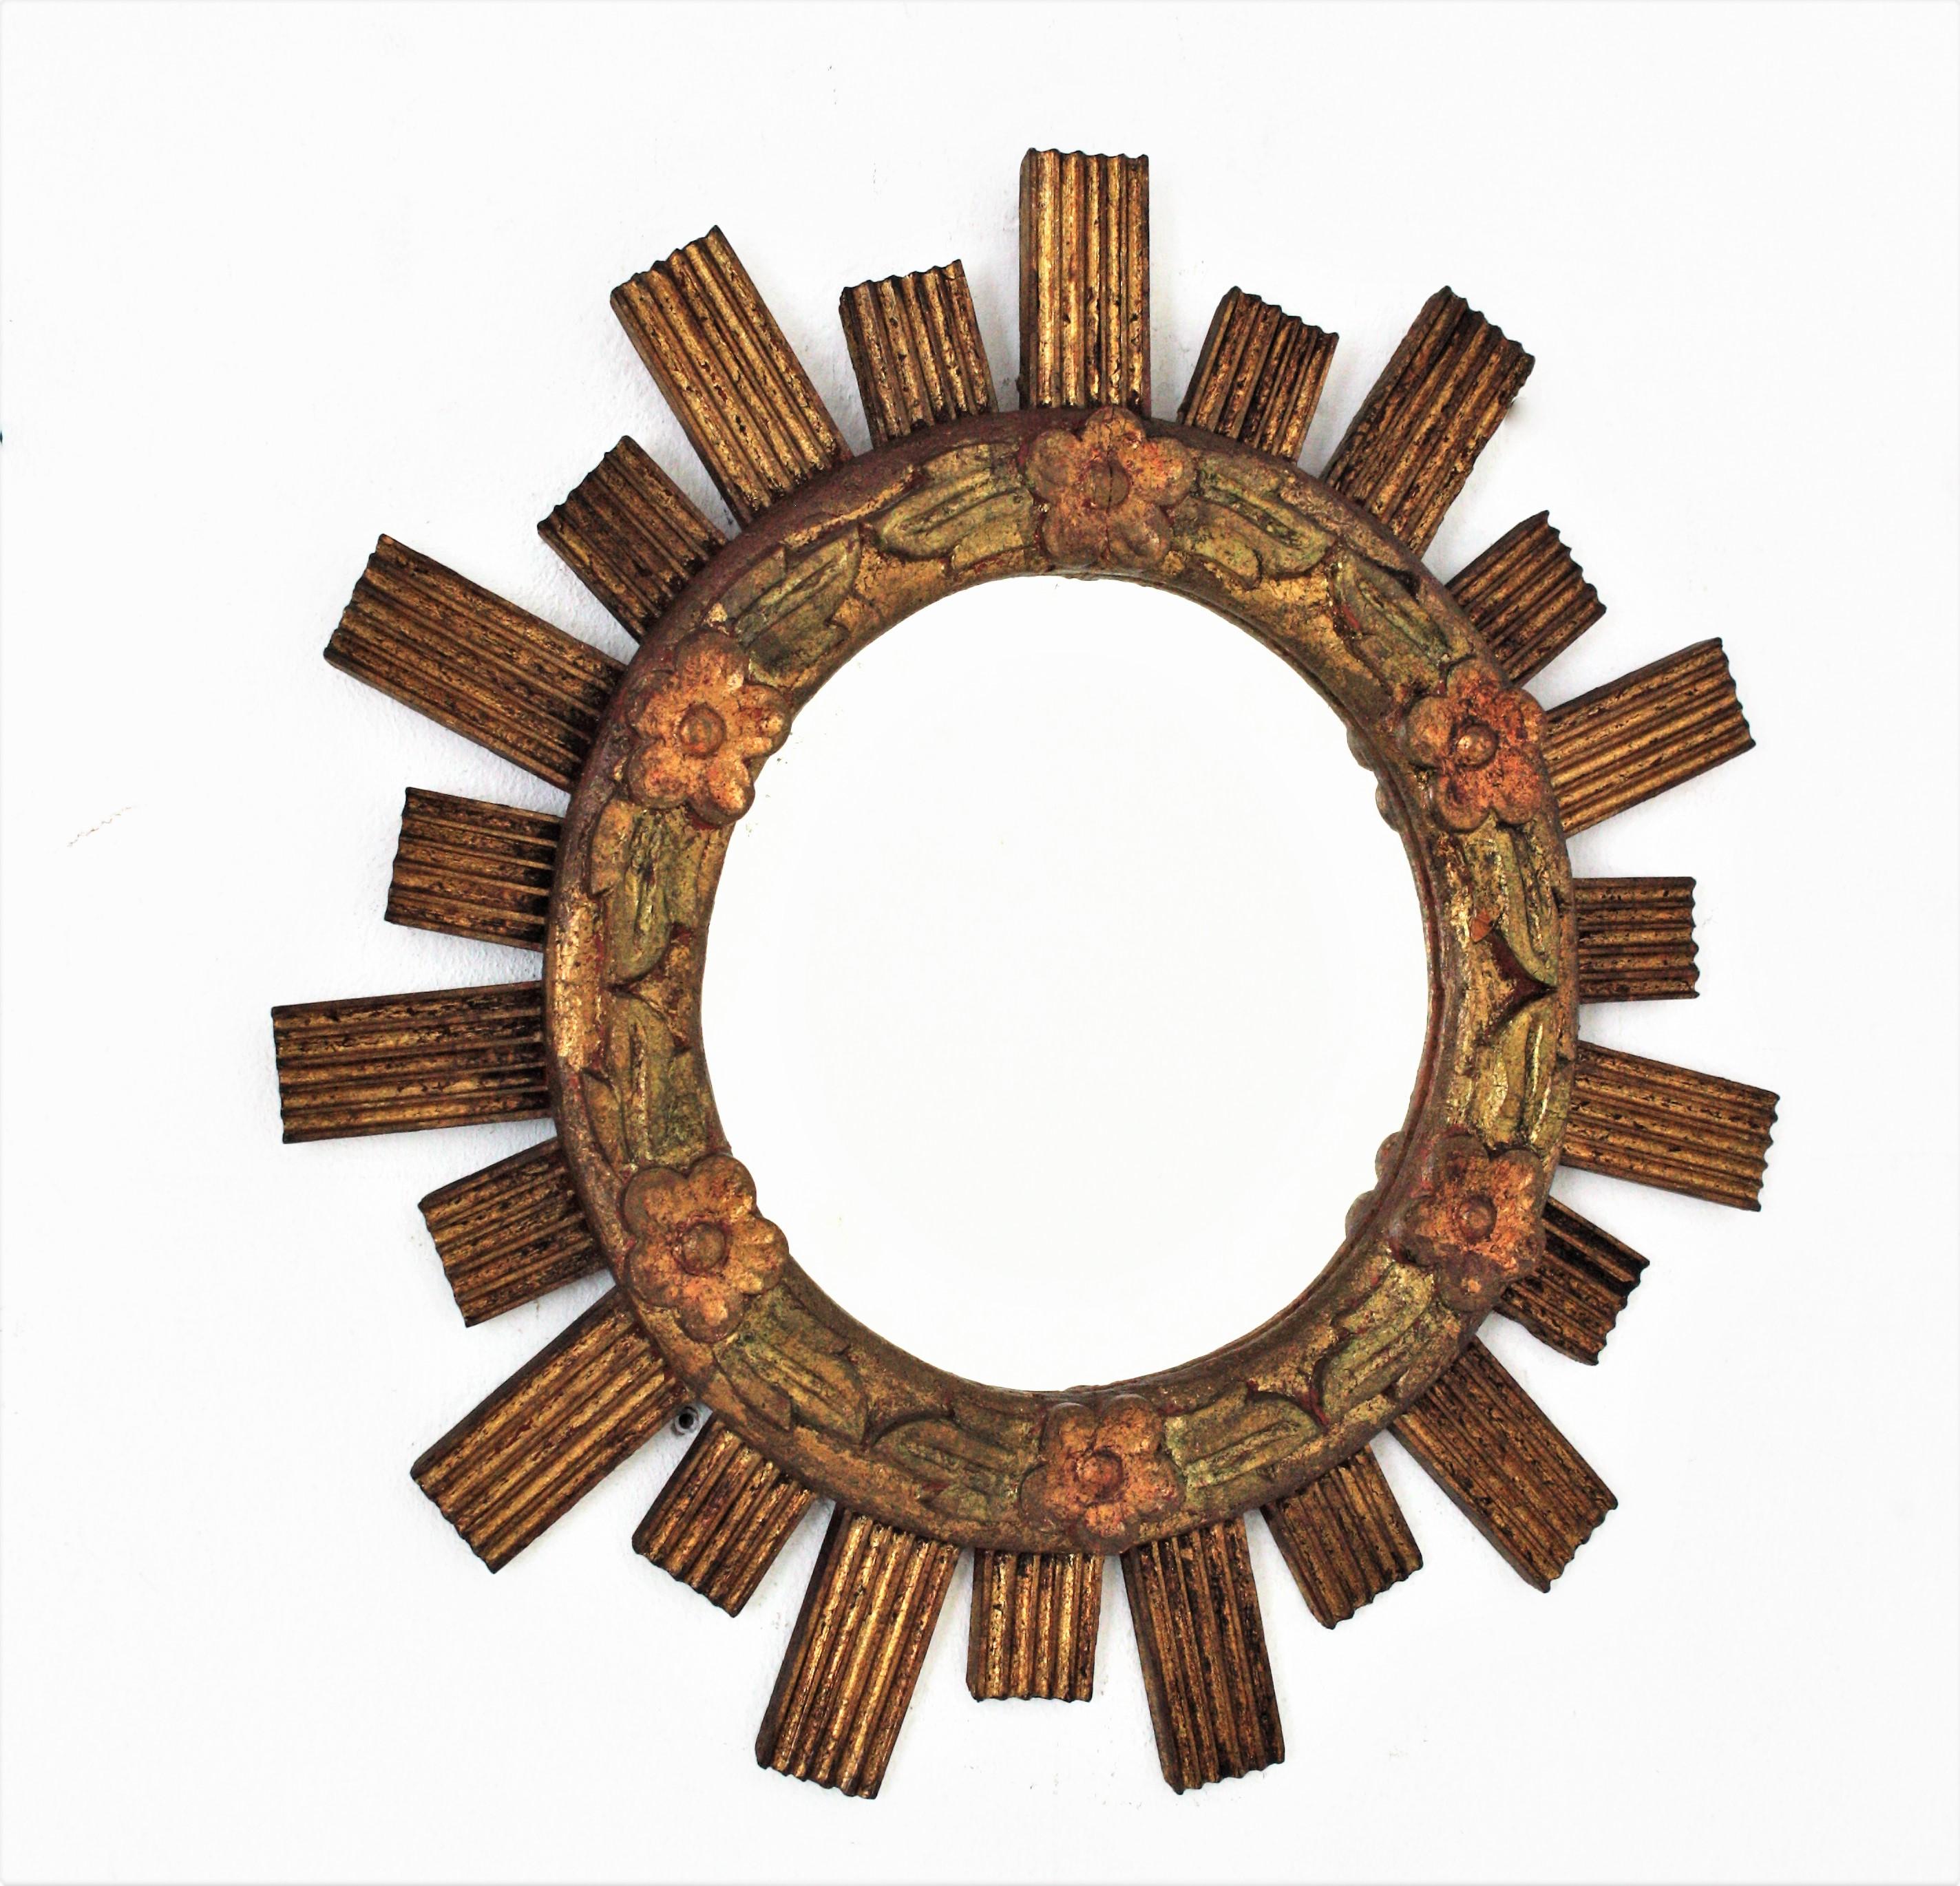 Outstanding carved and gilded wood round sunburst mirror with floral foliage frame. Spain, 1960s.
Carved wood and gold leaf gilding. The frame has striped carving details on the rays and small polychrome carved flowers adorning the central part. It